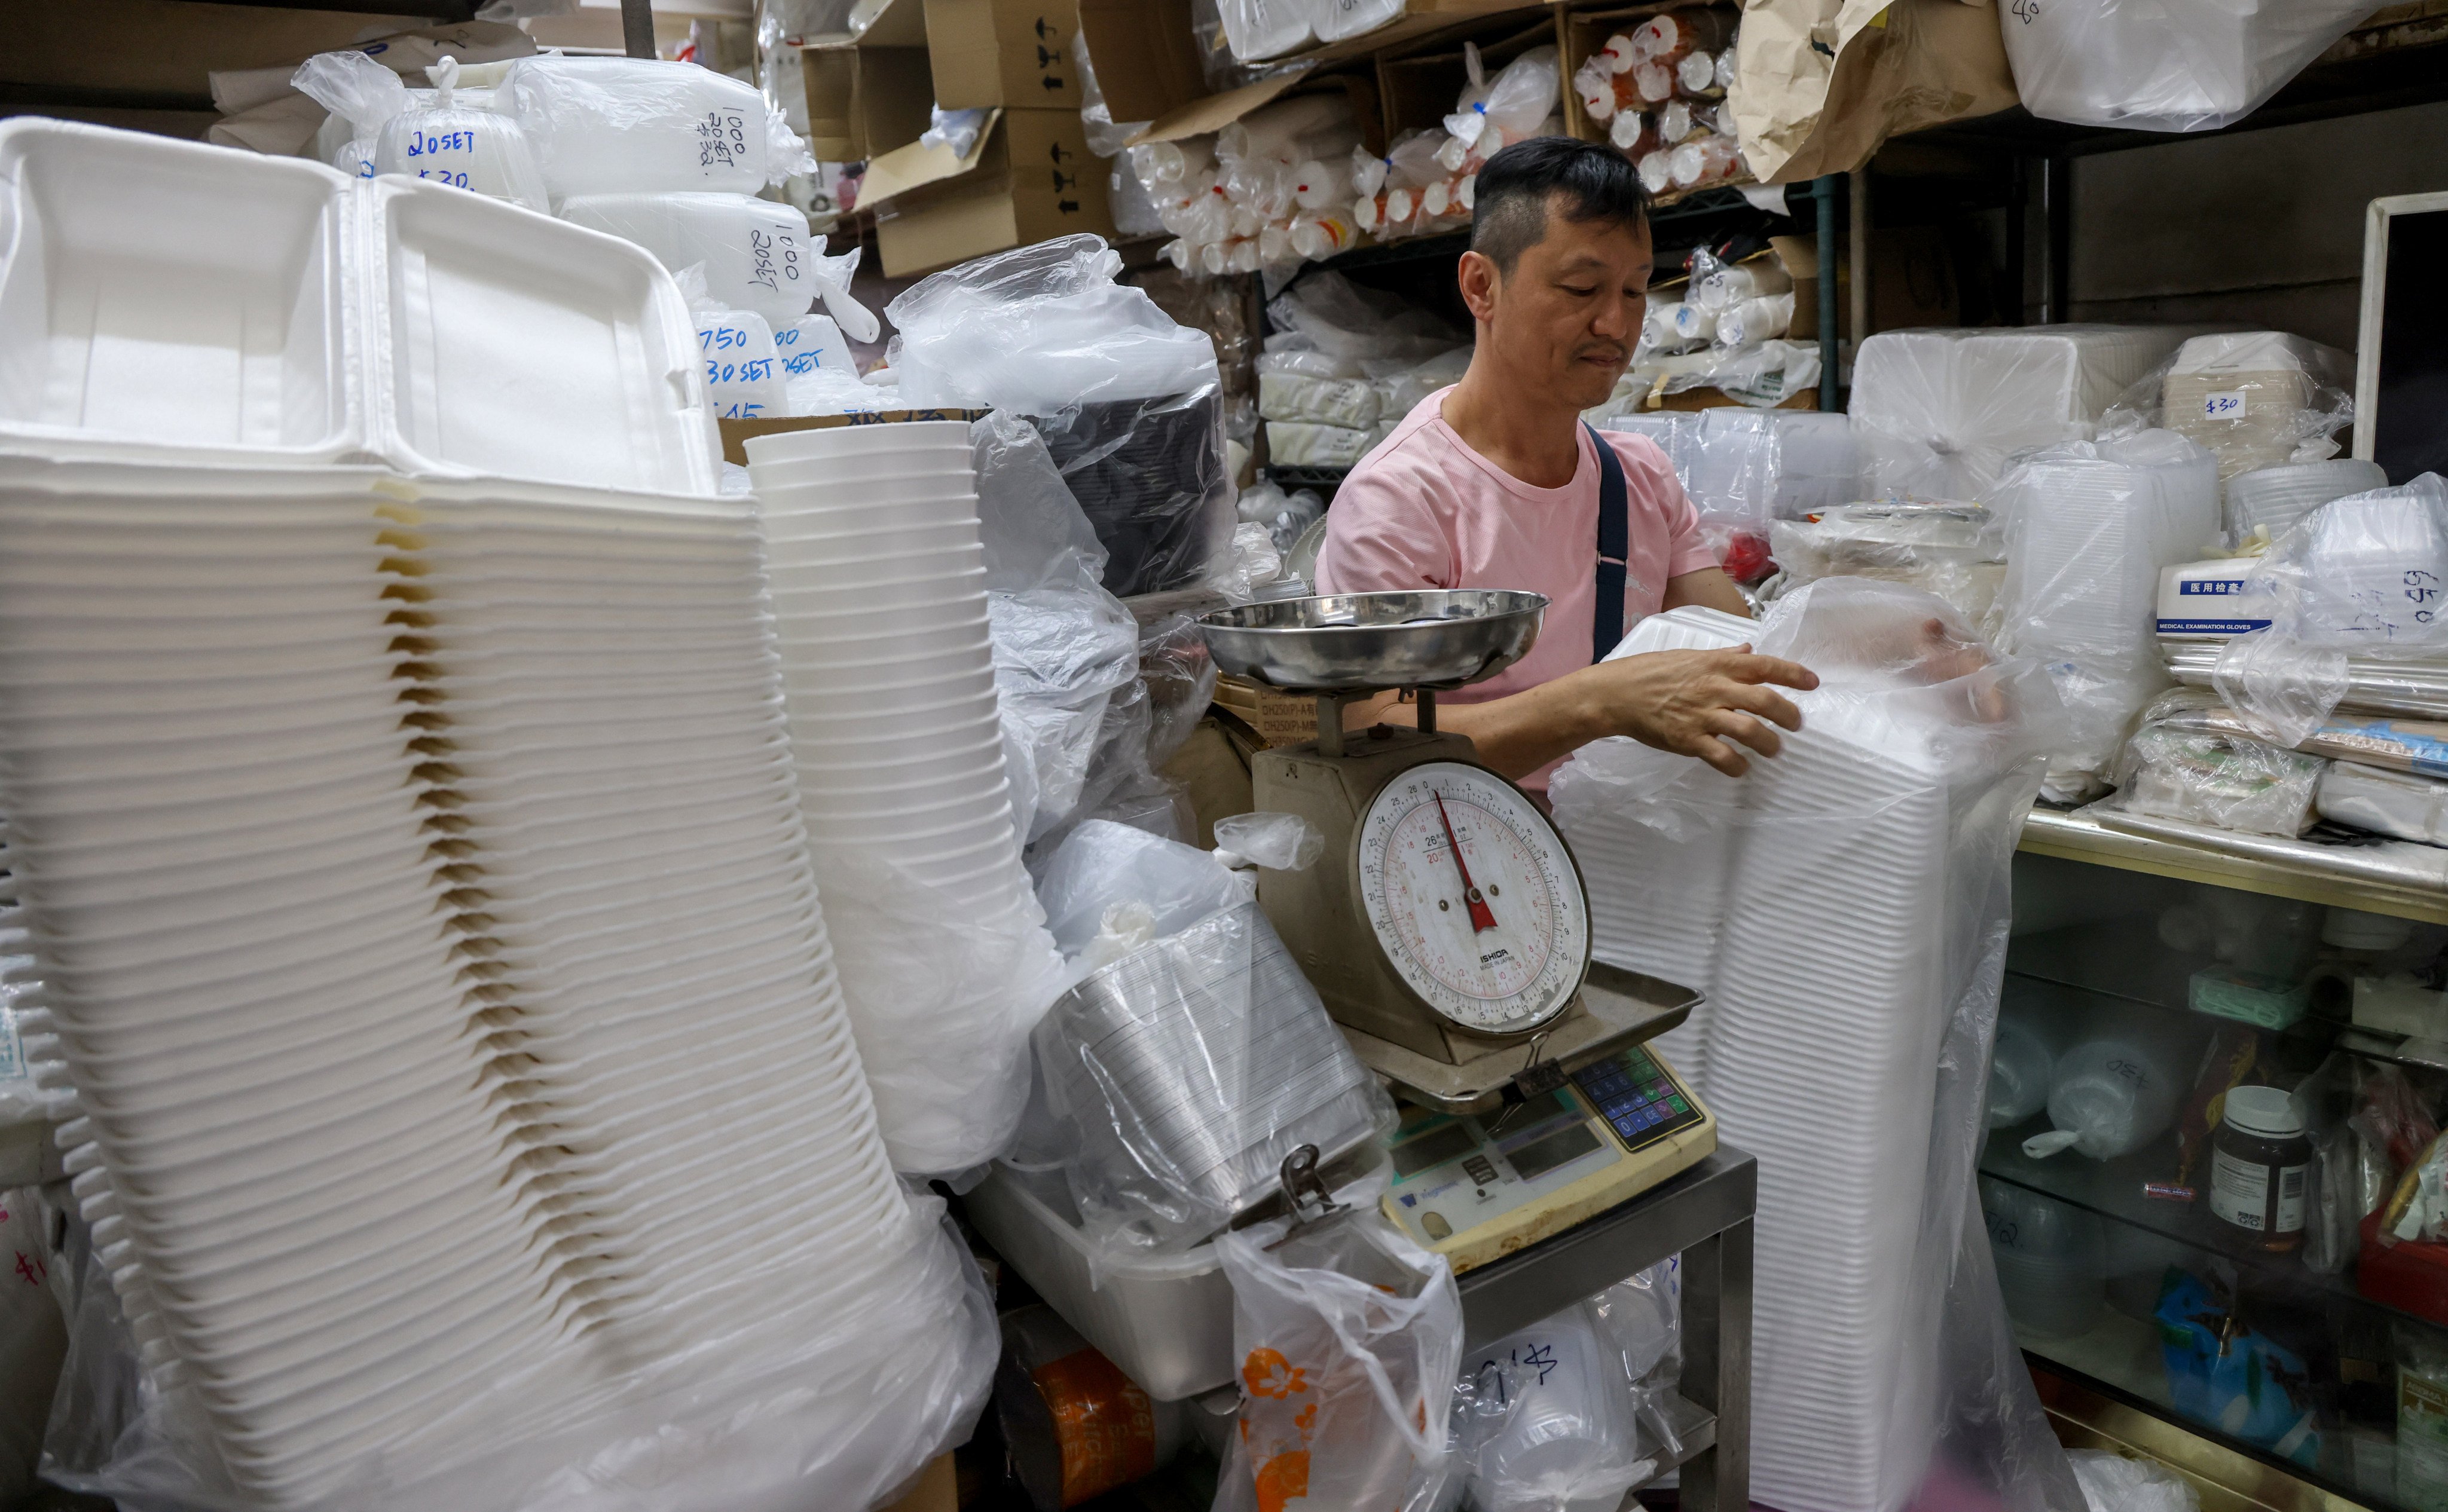 Dargon Cheung Kin-lung, owner of plastic tableware seller Luen Fat Plastic Bags in Sham Shui Po, handled his stock before a citywide ban on throwaway single-use plastics took effect. Photo: Dickson Lee